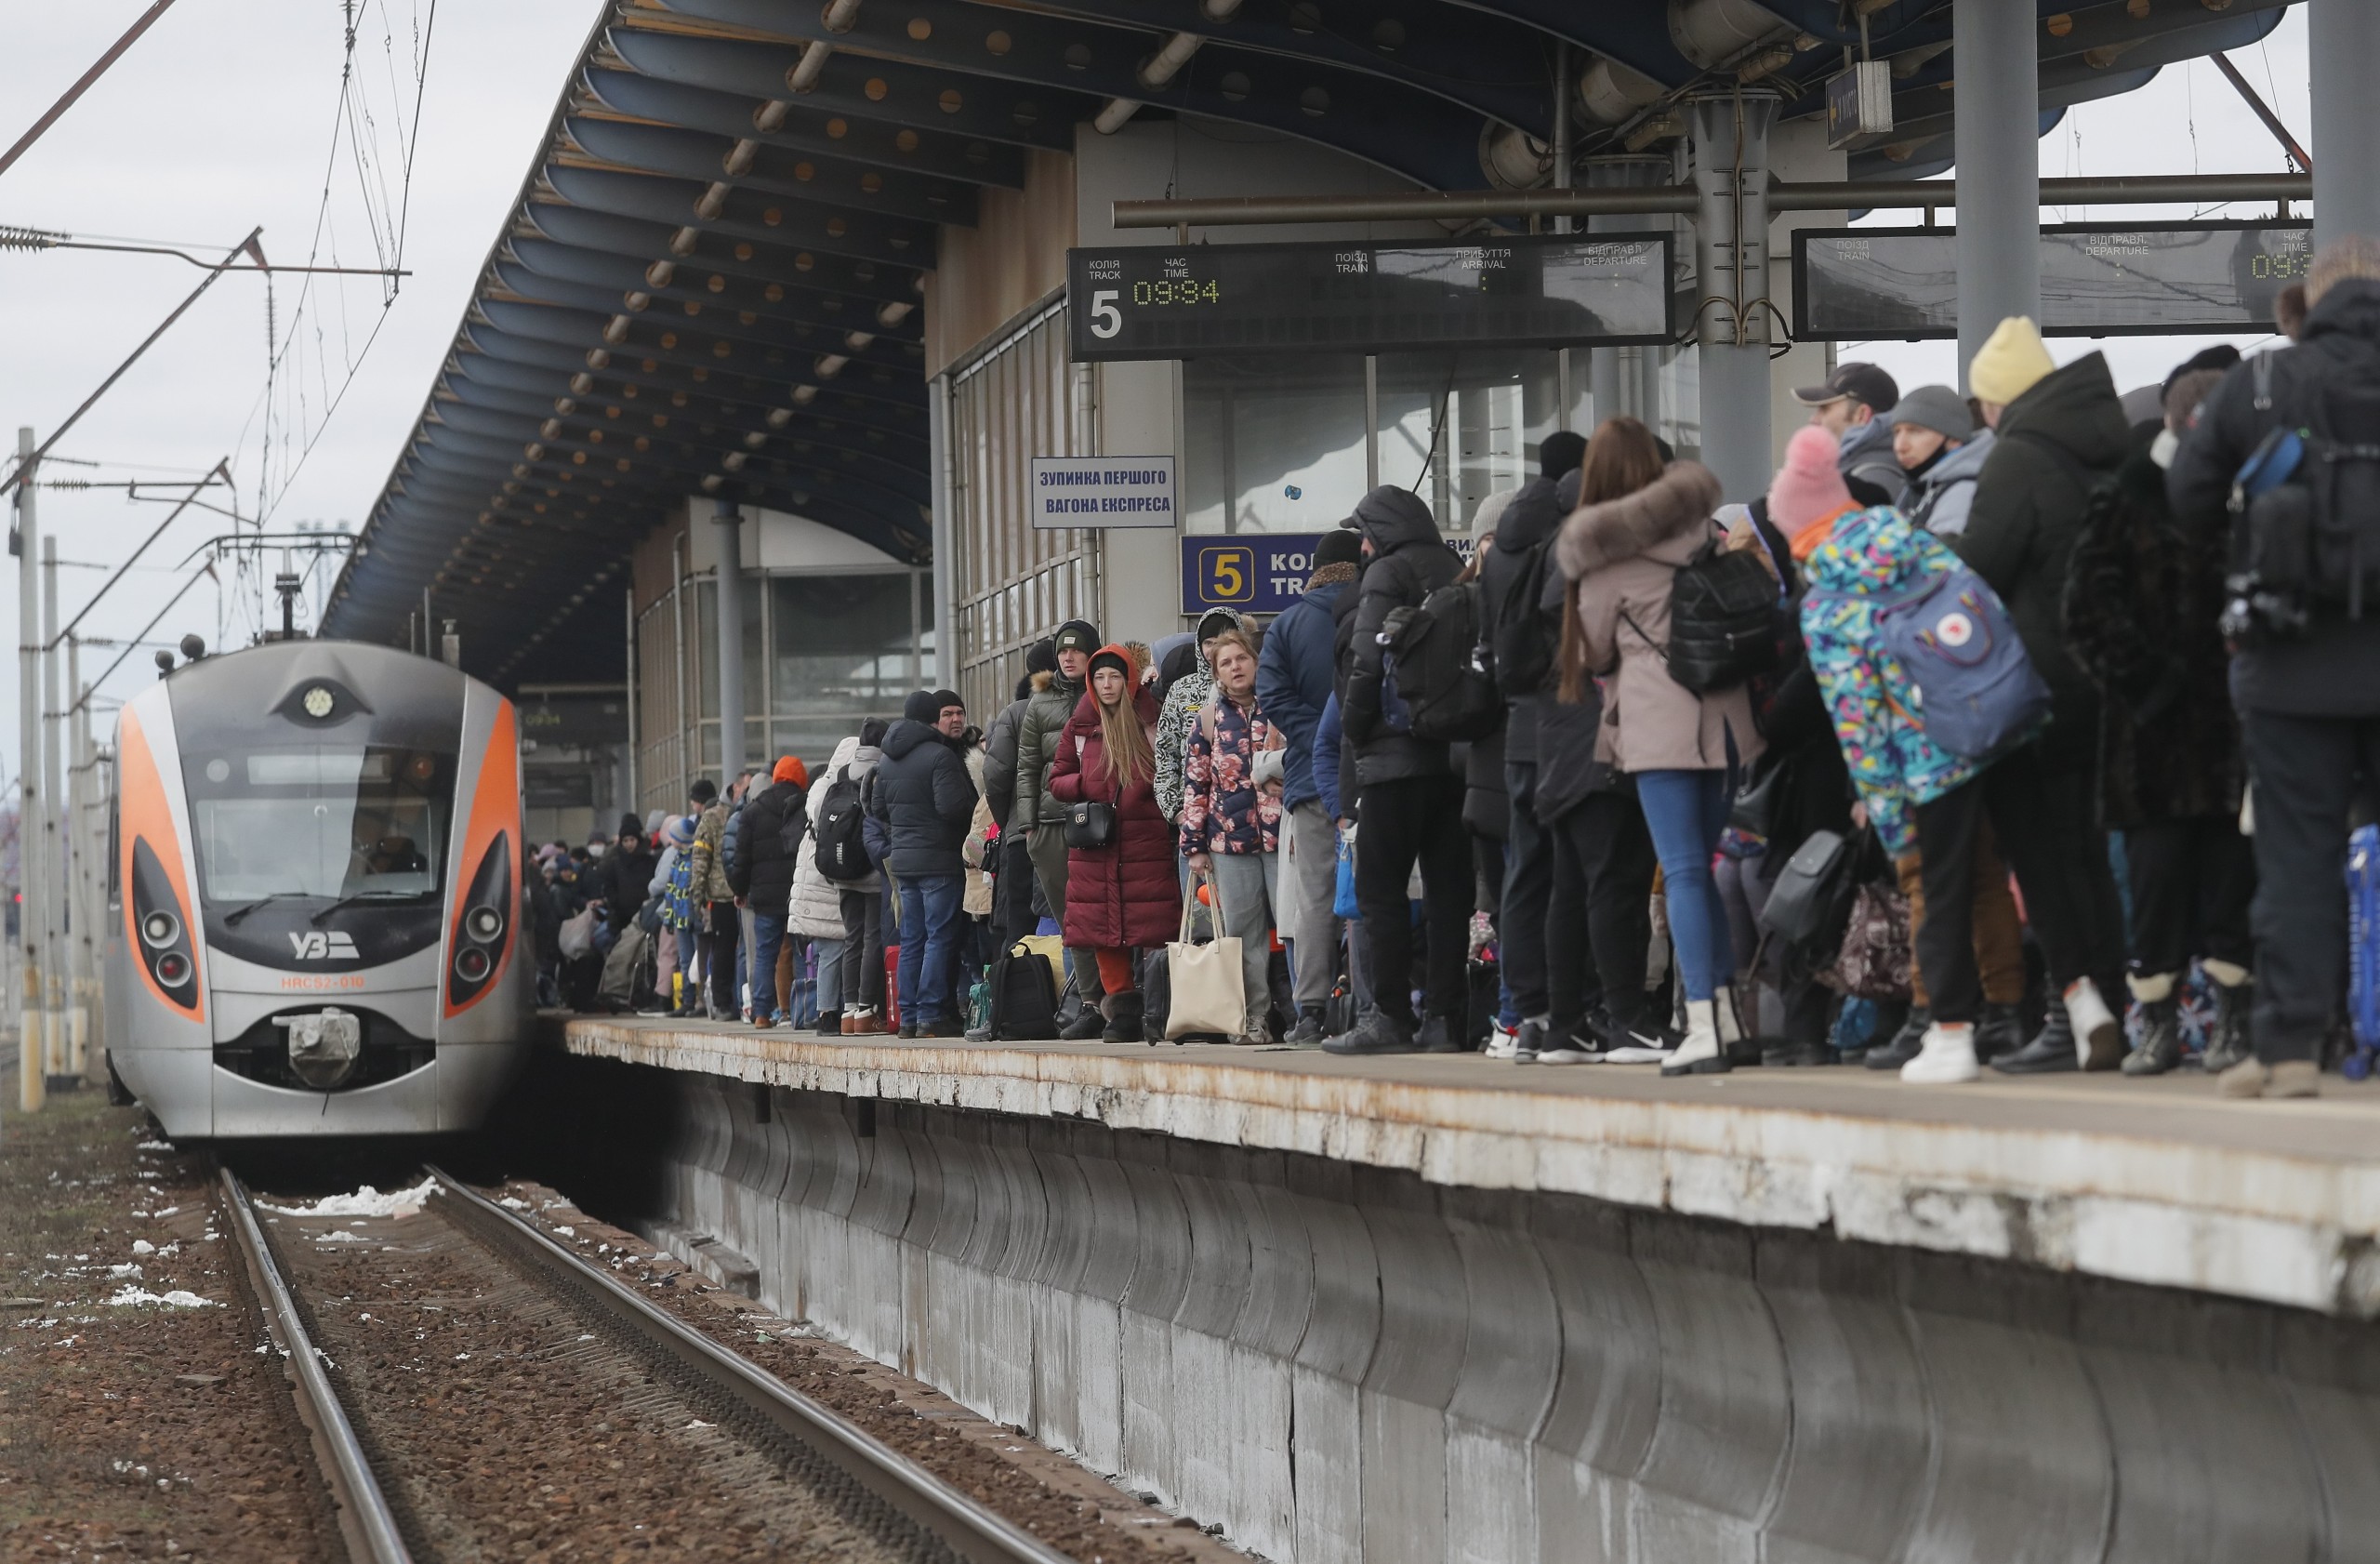 epa09803528 People wait for the arrival of an evacuation train at a railway station in Kyiv (Kiev), Ukraine, 05 March 2022. According to the United Nations (UN), at least one million people have fled Ukraine to neighboring countries since the beginning of Russia's military aggression on 24 February 2022. The UN estimates that around 160,000 Ukrainians are currently internally displaced.  EPA/SERGEY DOLZHENKO